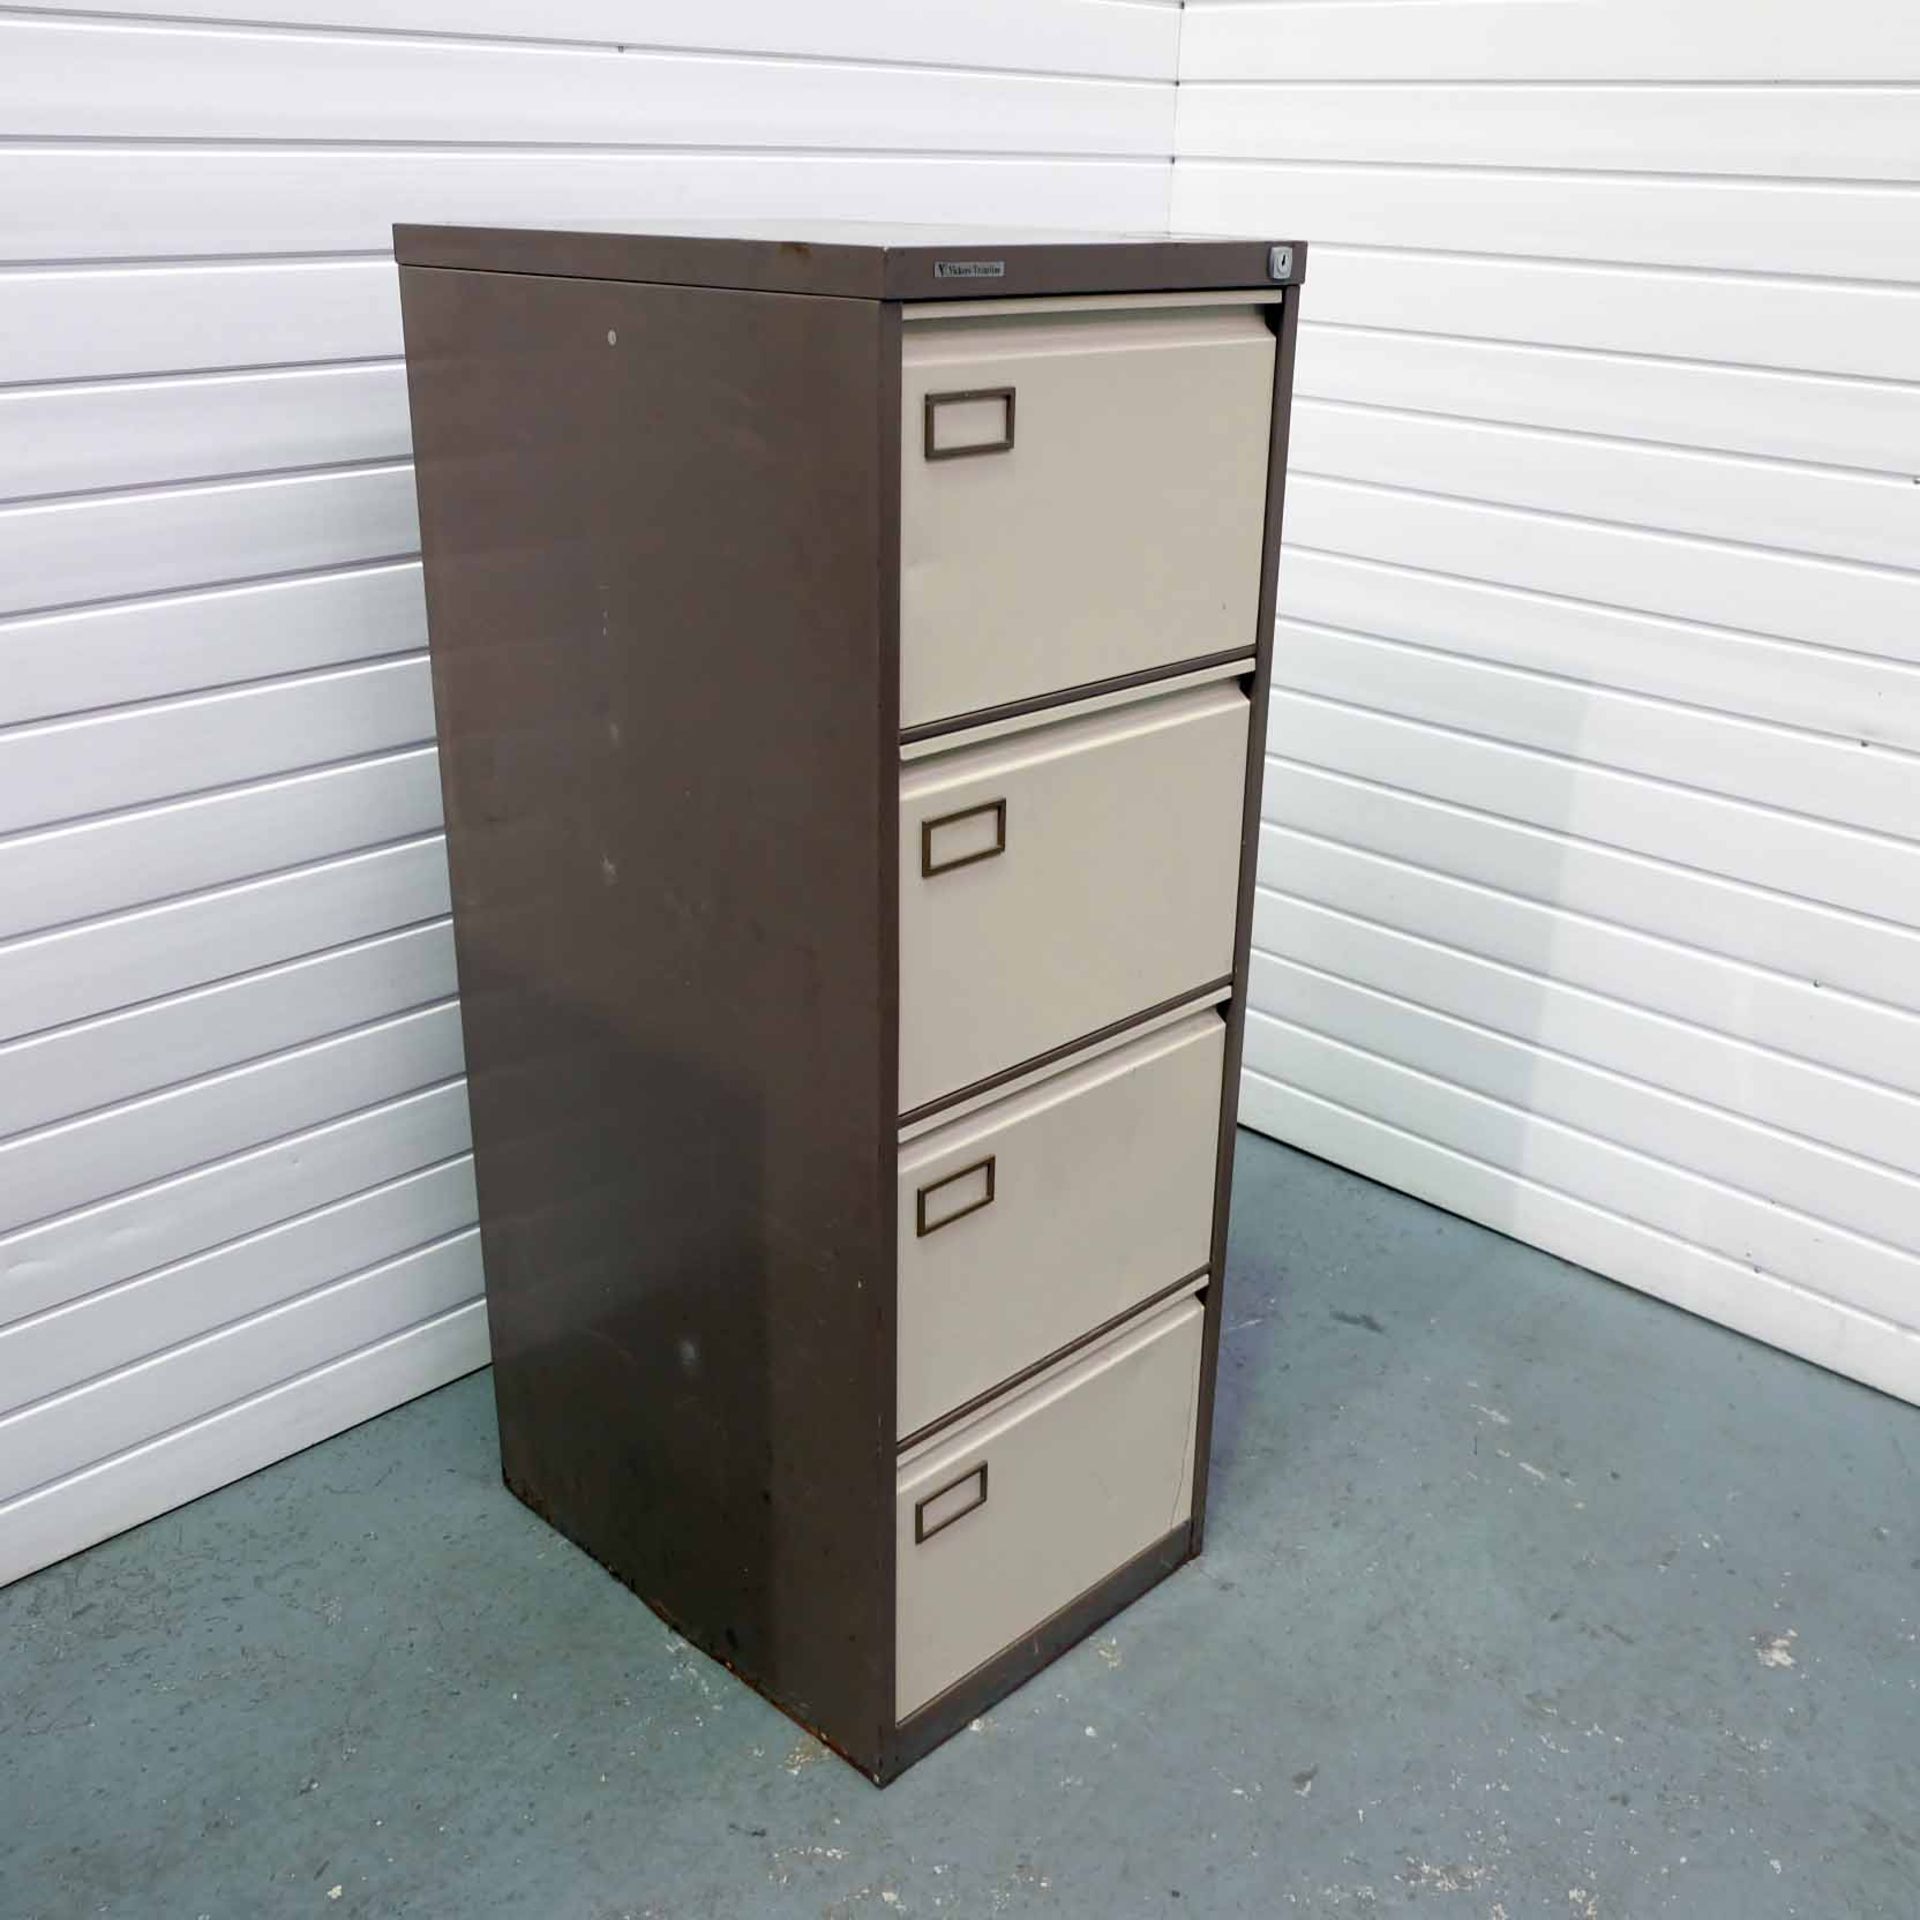 Vickers Trimline 4 Drawer Steel Filing Cabinet. Size 470mm x 620mm. Height 1320mm. - Image 2 of 4